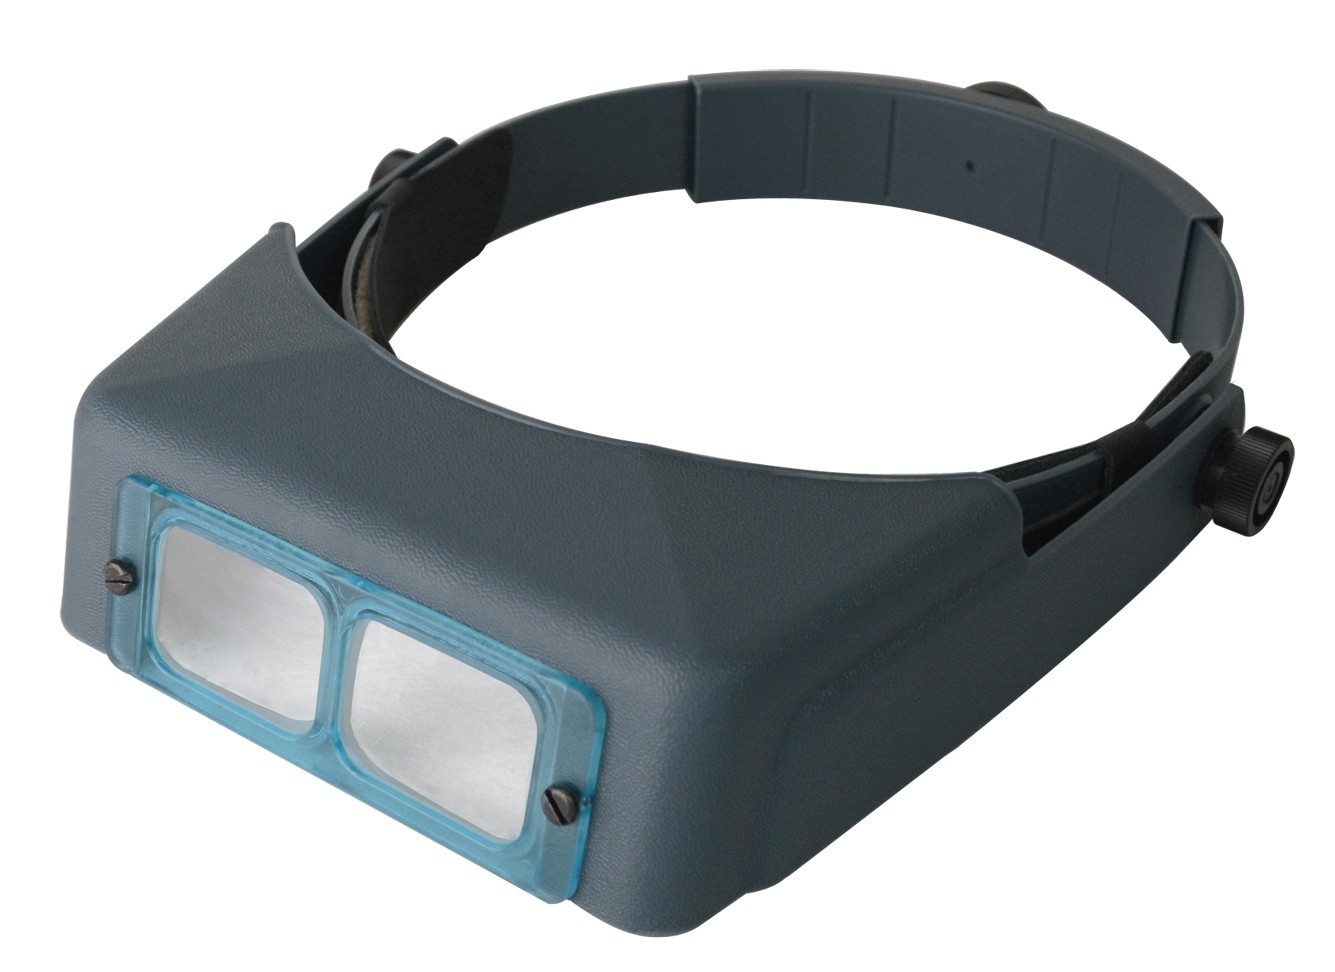 Optivisor Magnifier with Headband Mount, 1.75x Magnification, 14